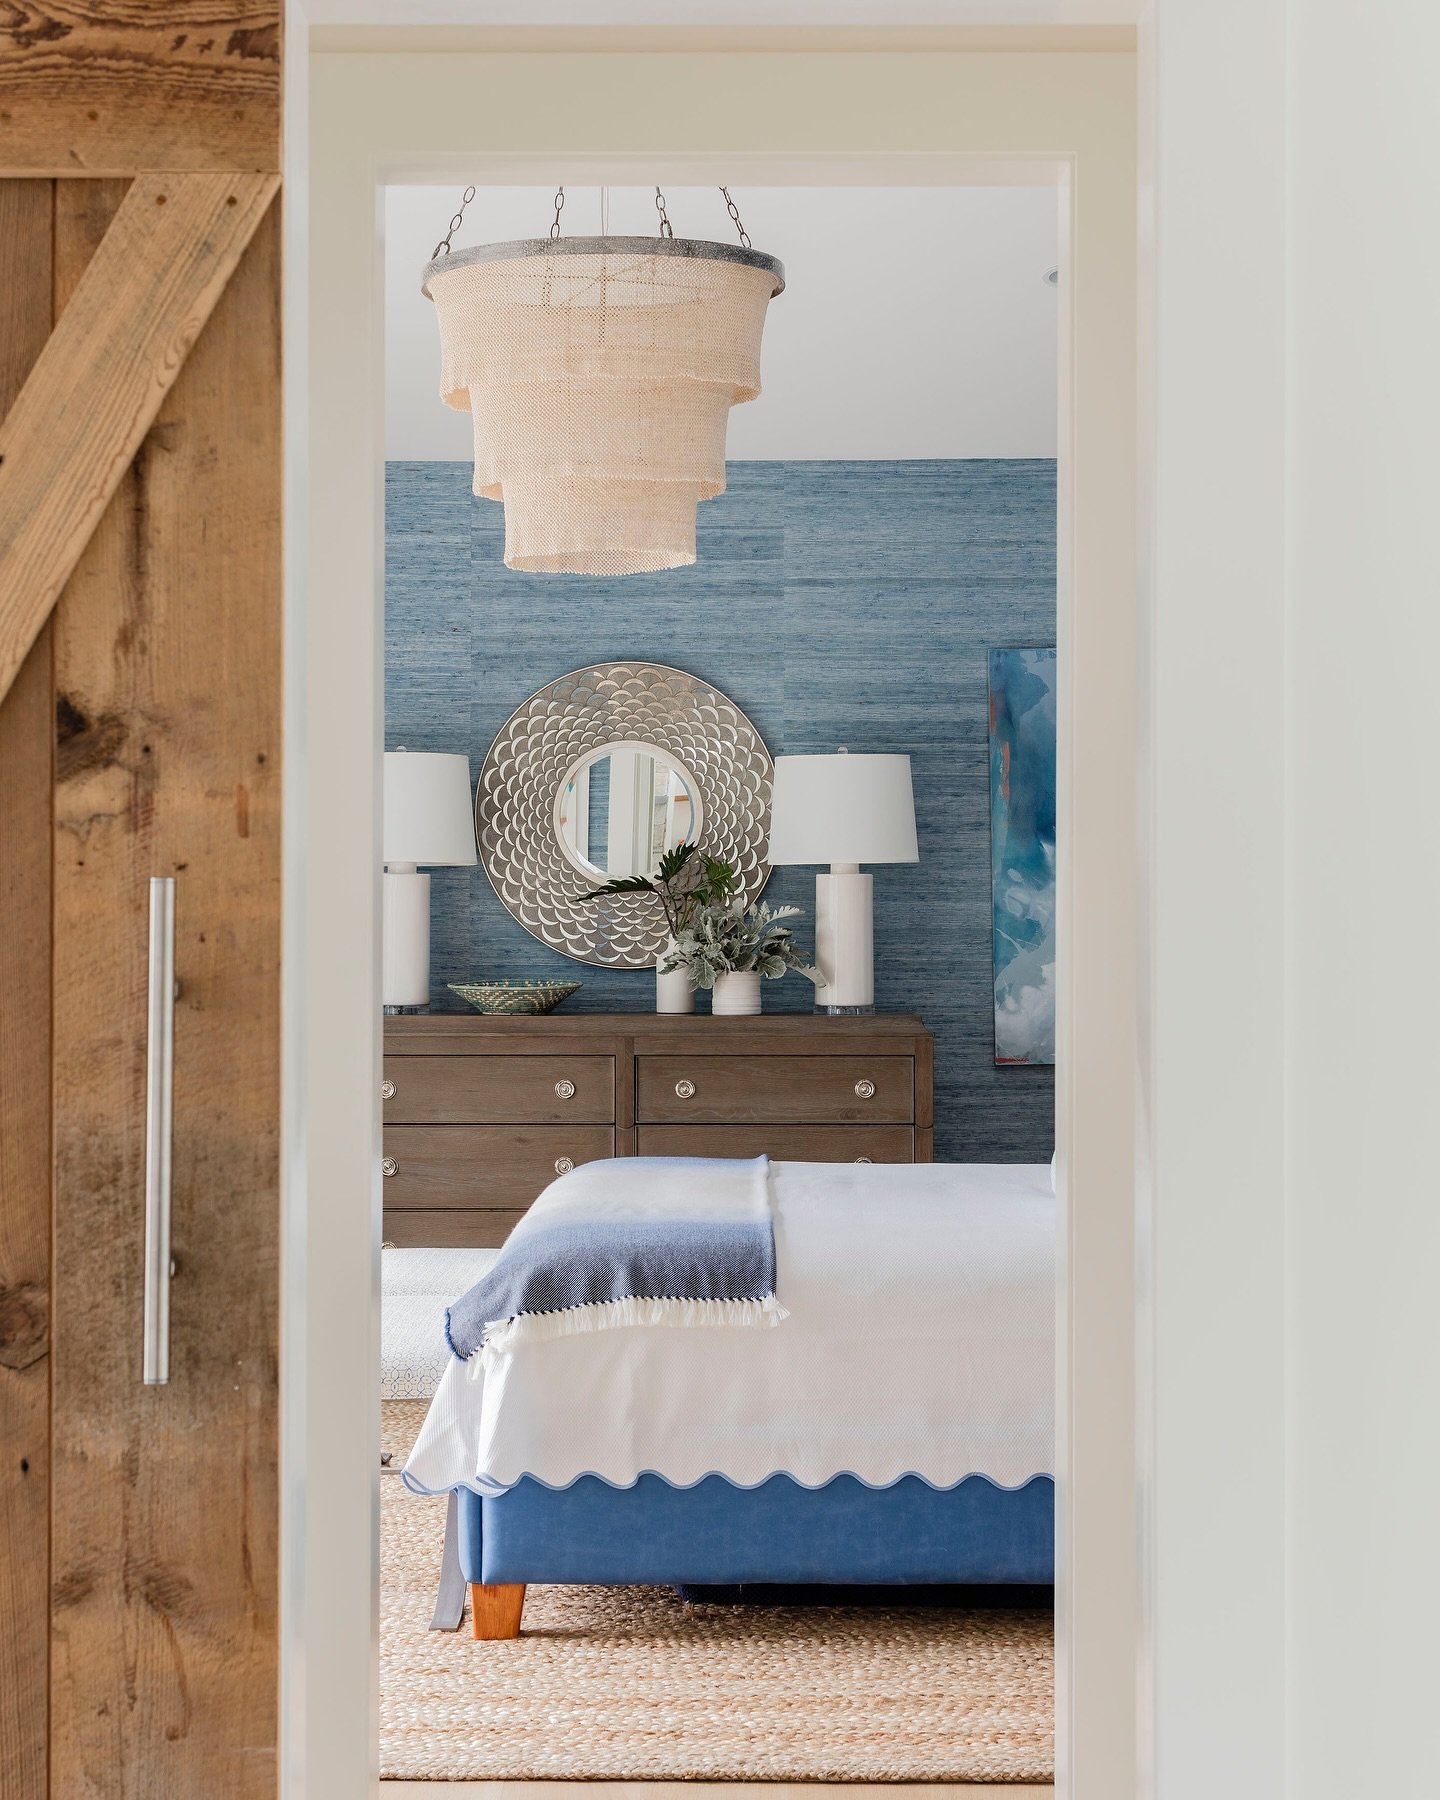 Looking to recharge your batteries this weekend? Just slide the door shut and you&rsquo;re in one of the most serene seaside havens around.⁣
⁣
⁣
Interior design: @robingannoninteriors⁣
Photography: @michaeljleephotography